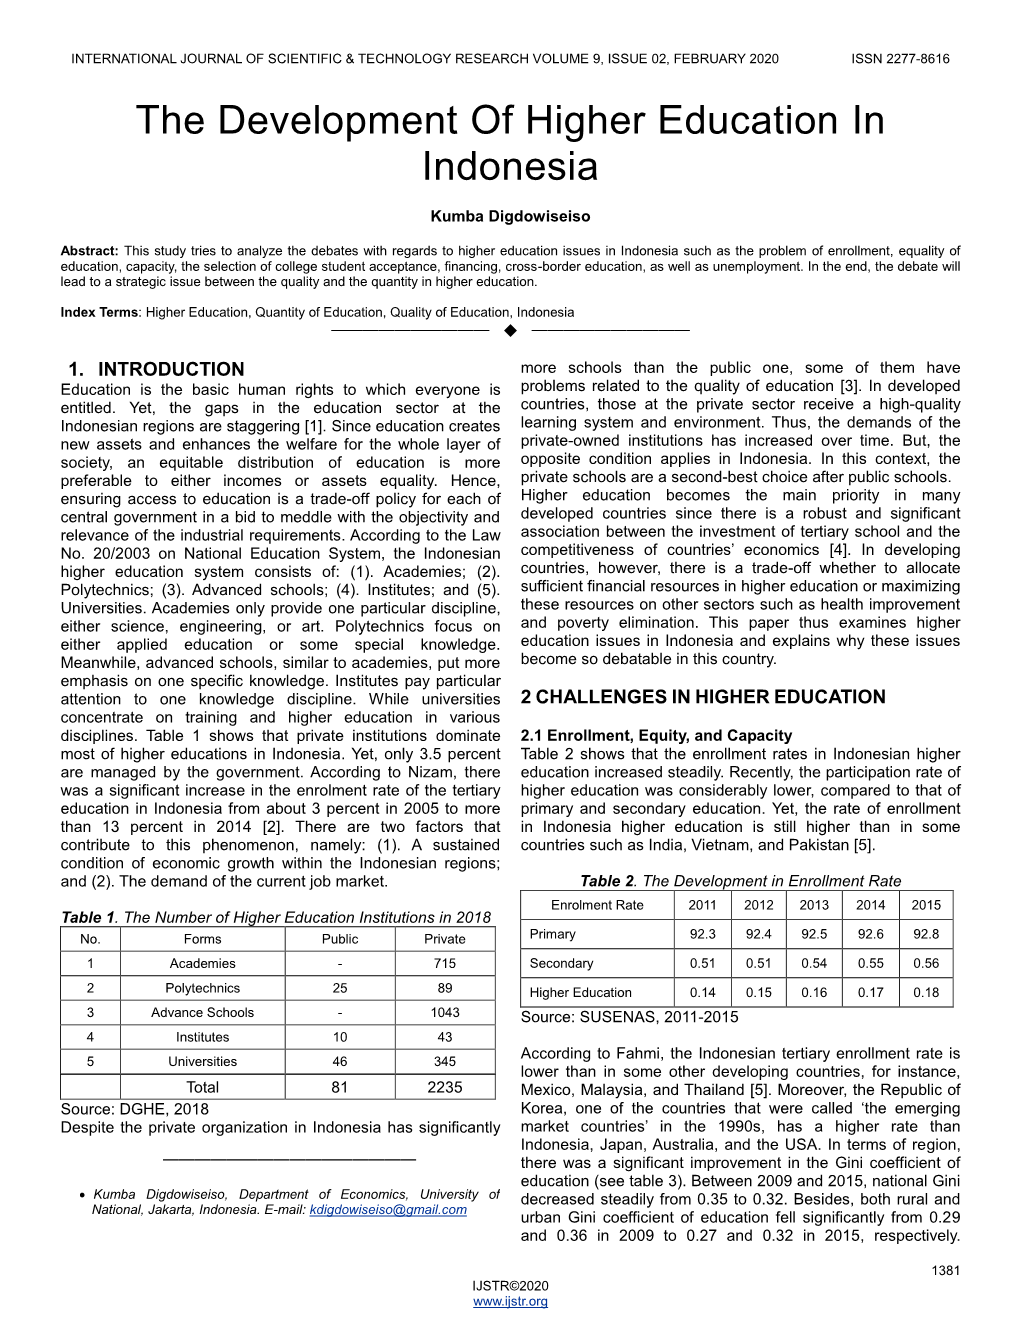 The Development of Higher Education in Indonesia